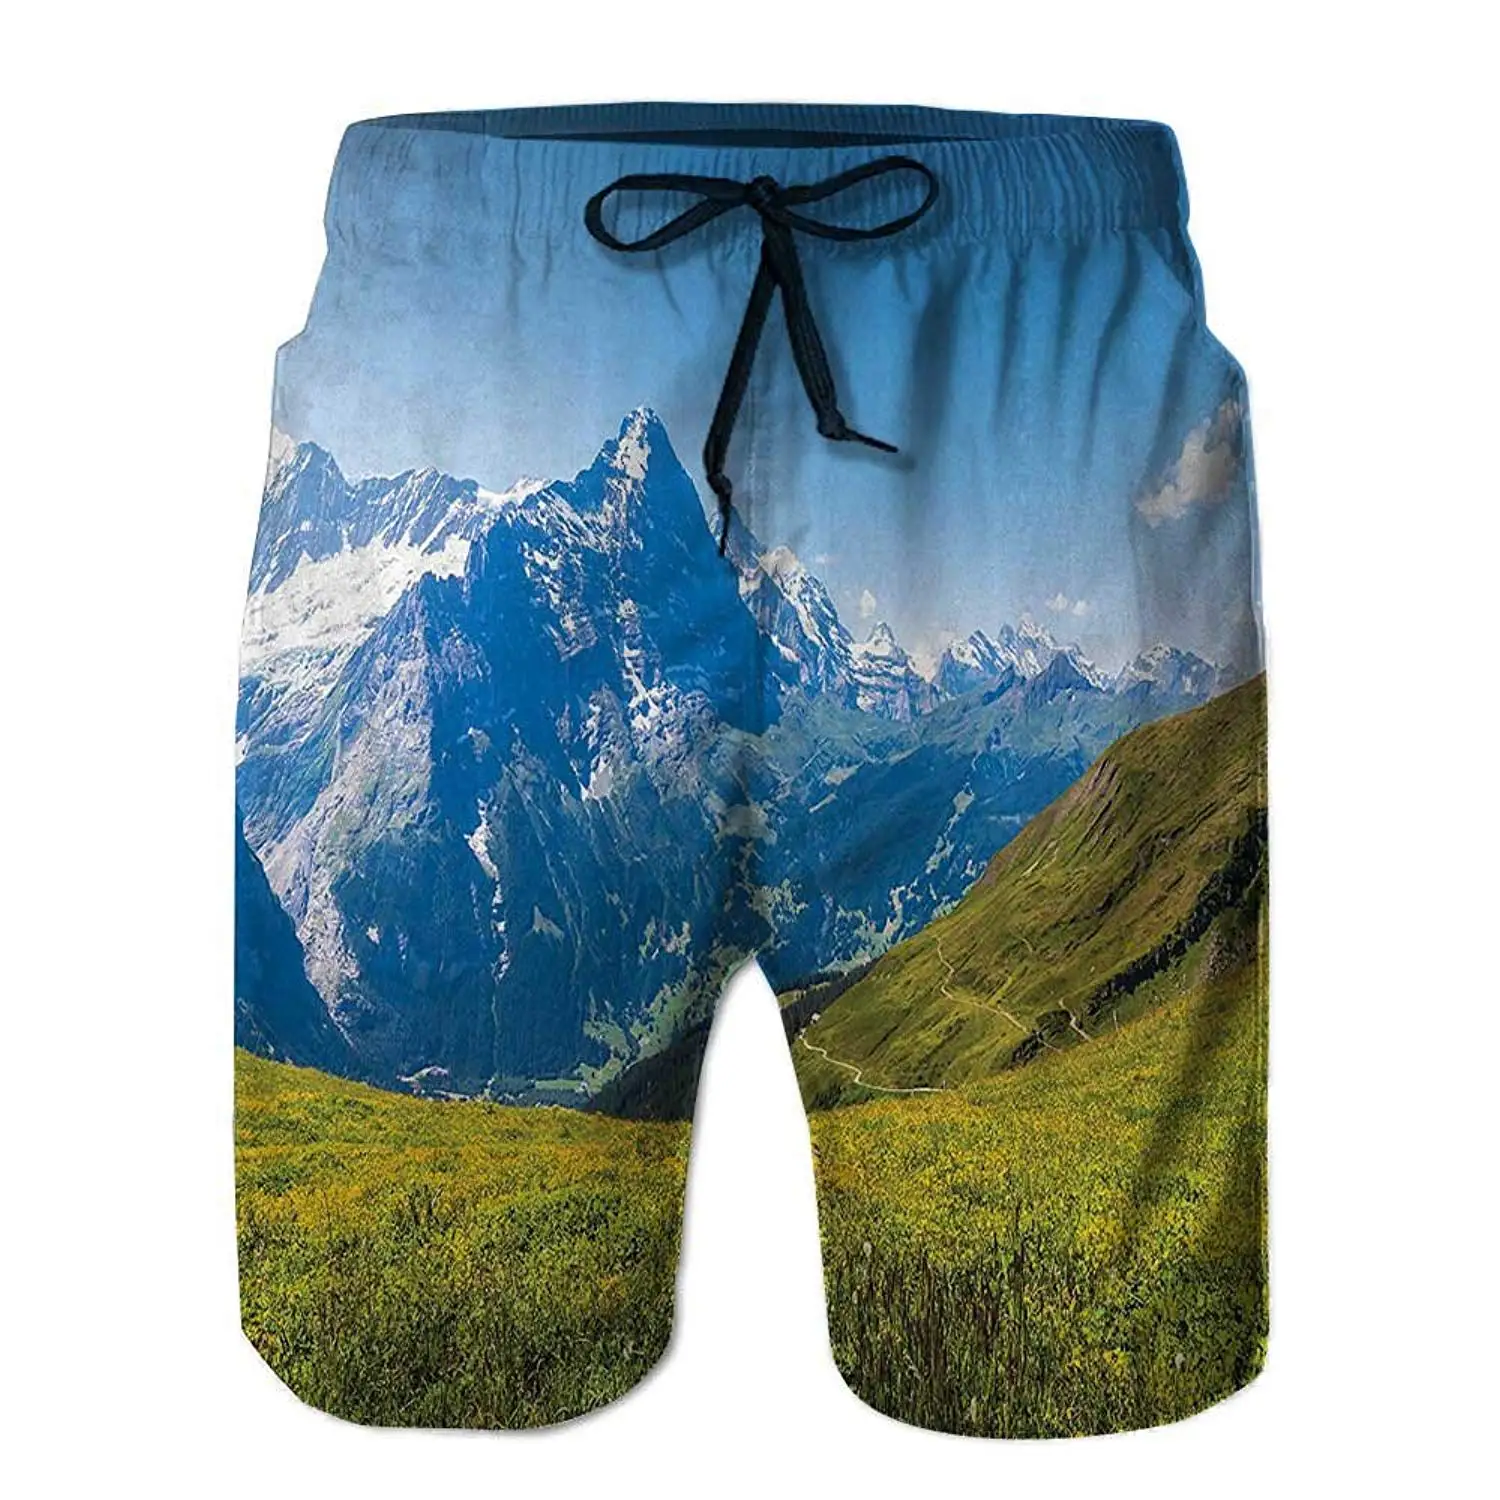 Cheap Swiss Shorts, find Swiss Shorts deals on line at Alibaba.com